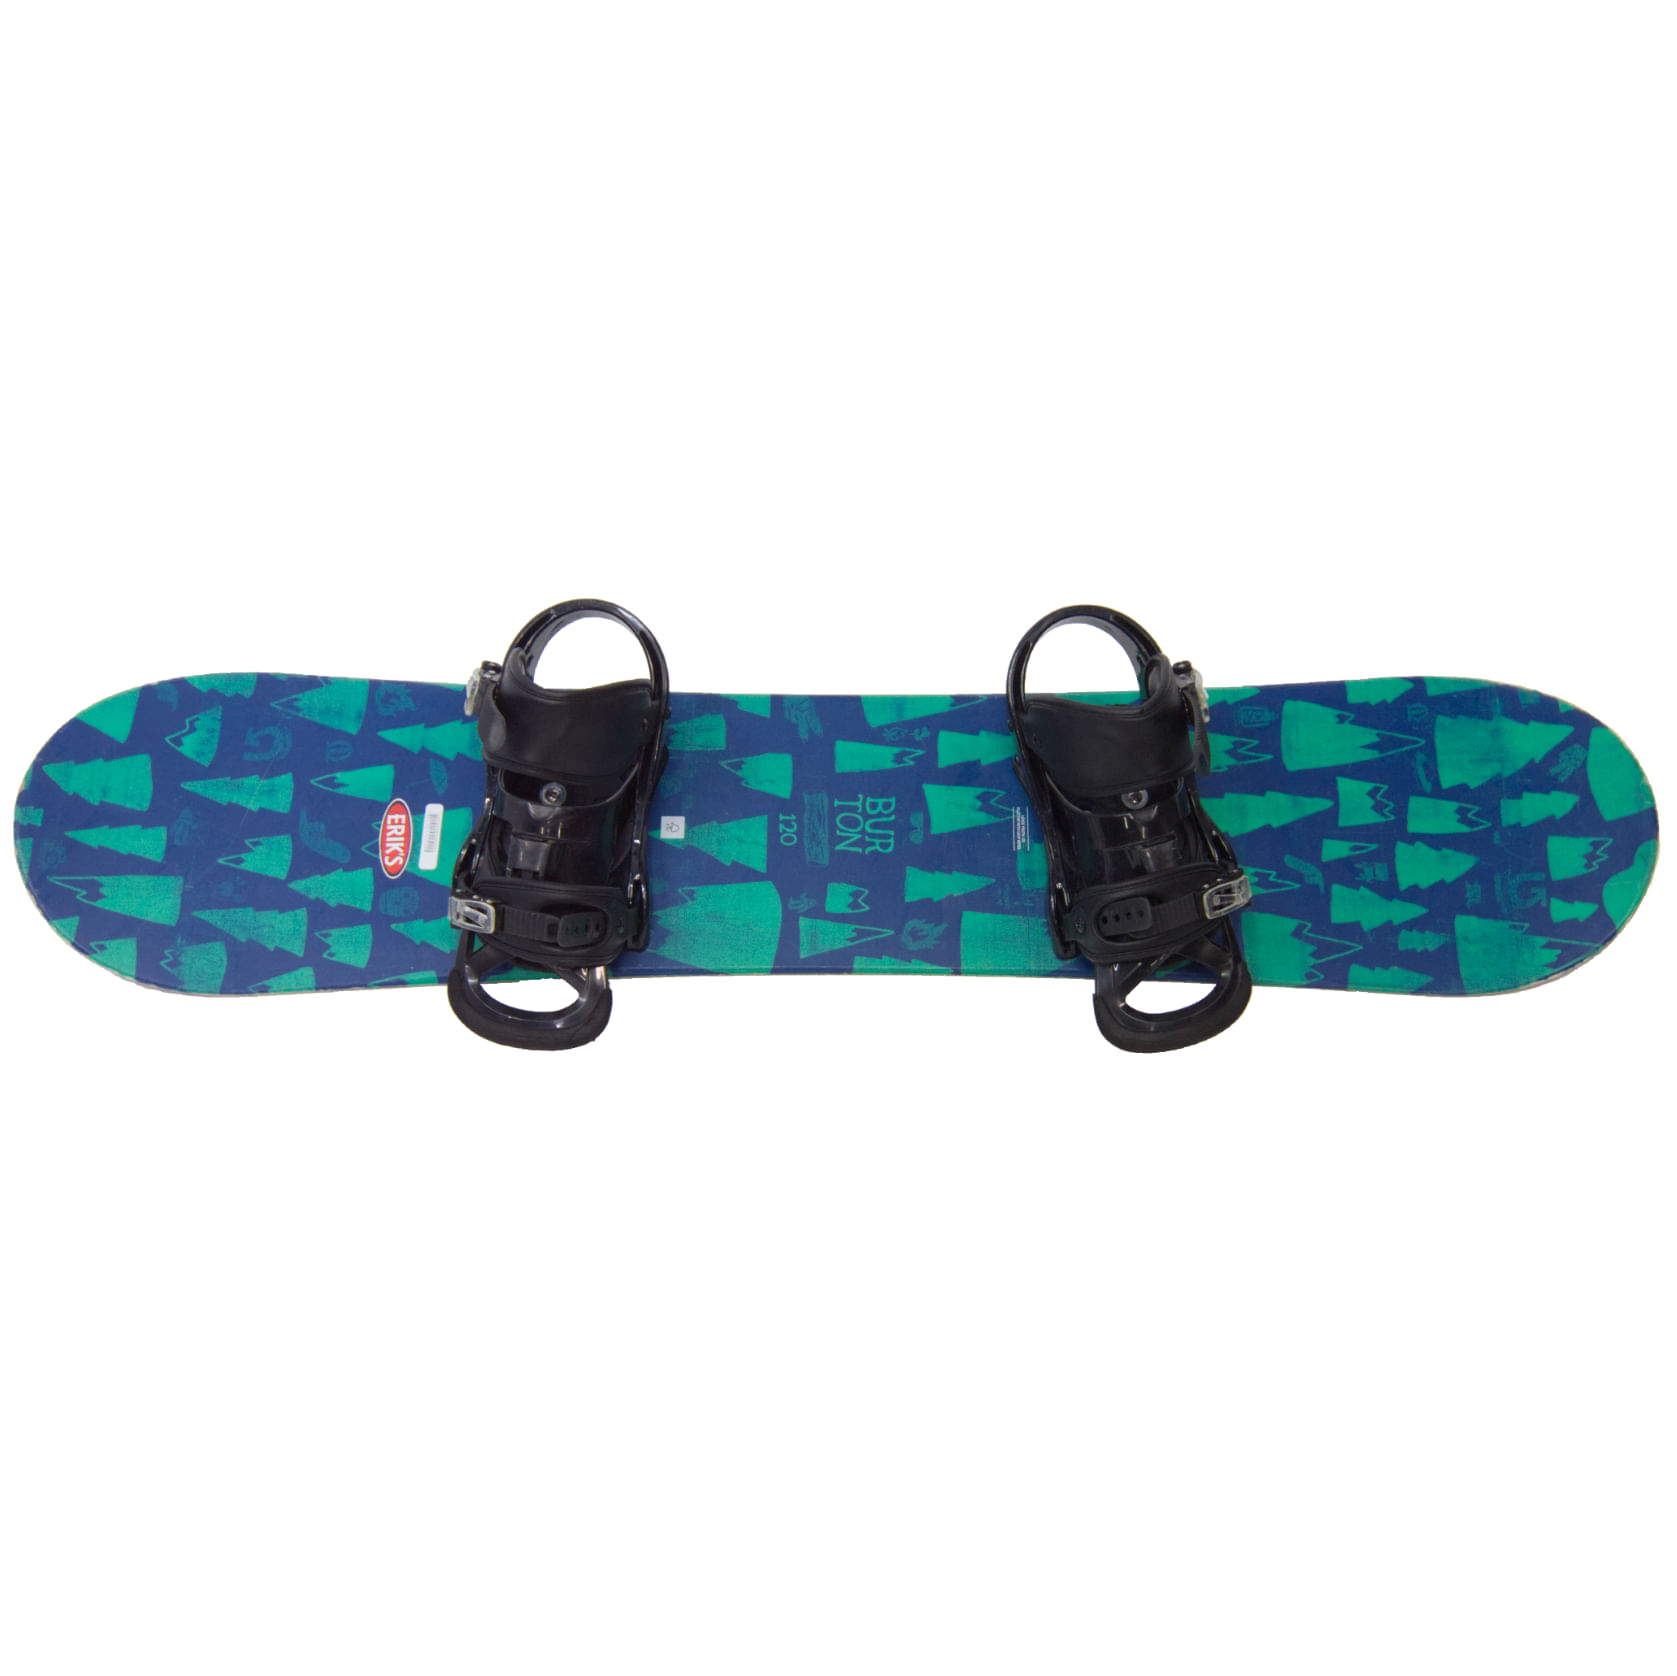 Snowboards for Sale